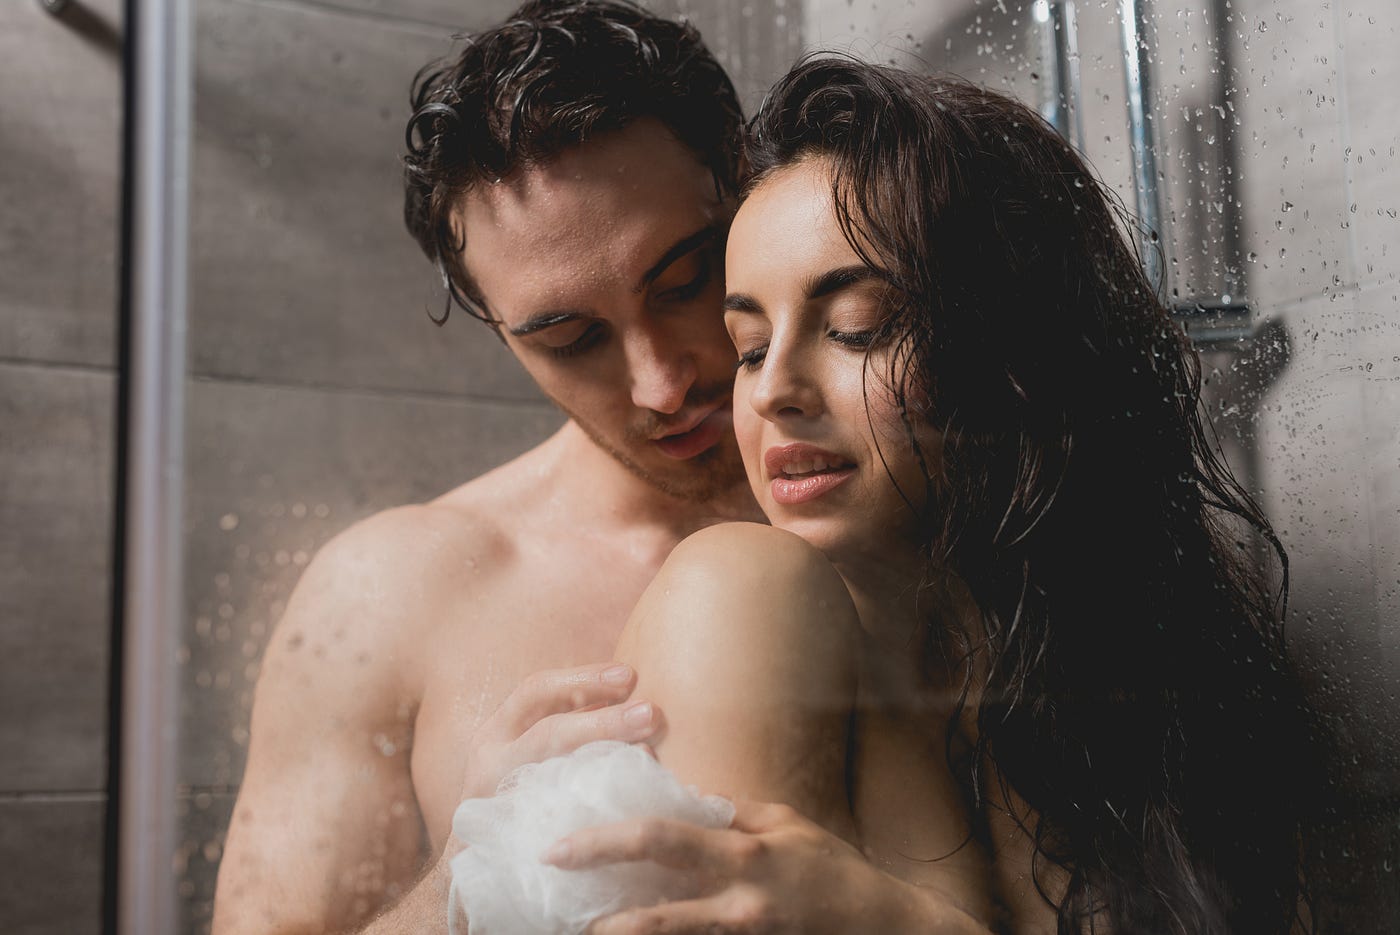 3 Reasons to Try Showering With Your Partner Enjoy this wet path to intimacy Sex…With a Side of Quirk Sex Pic Hd